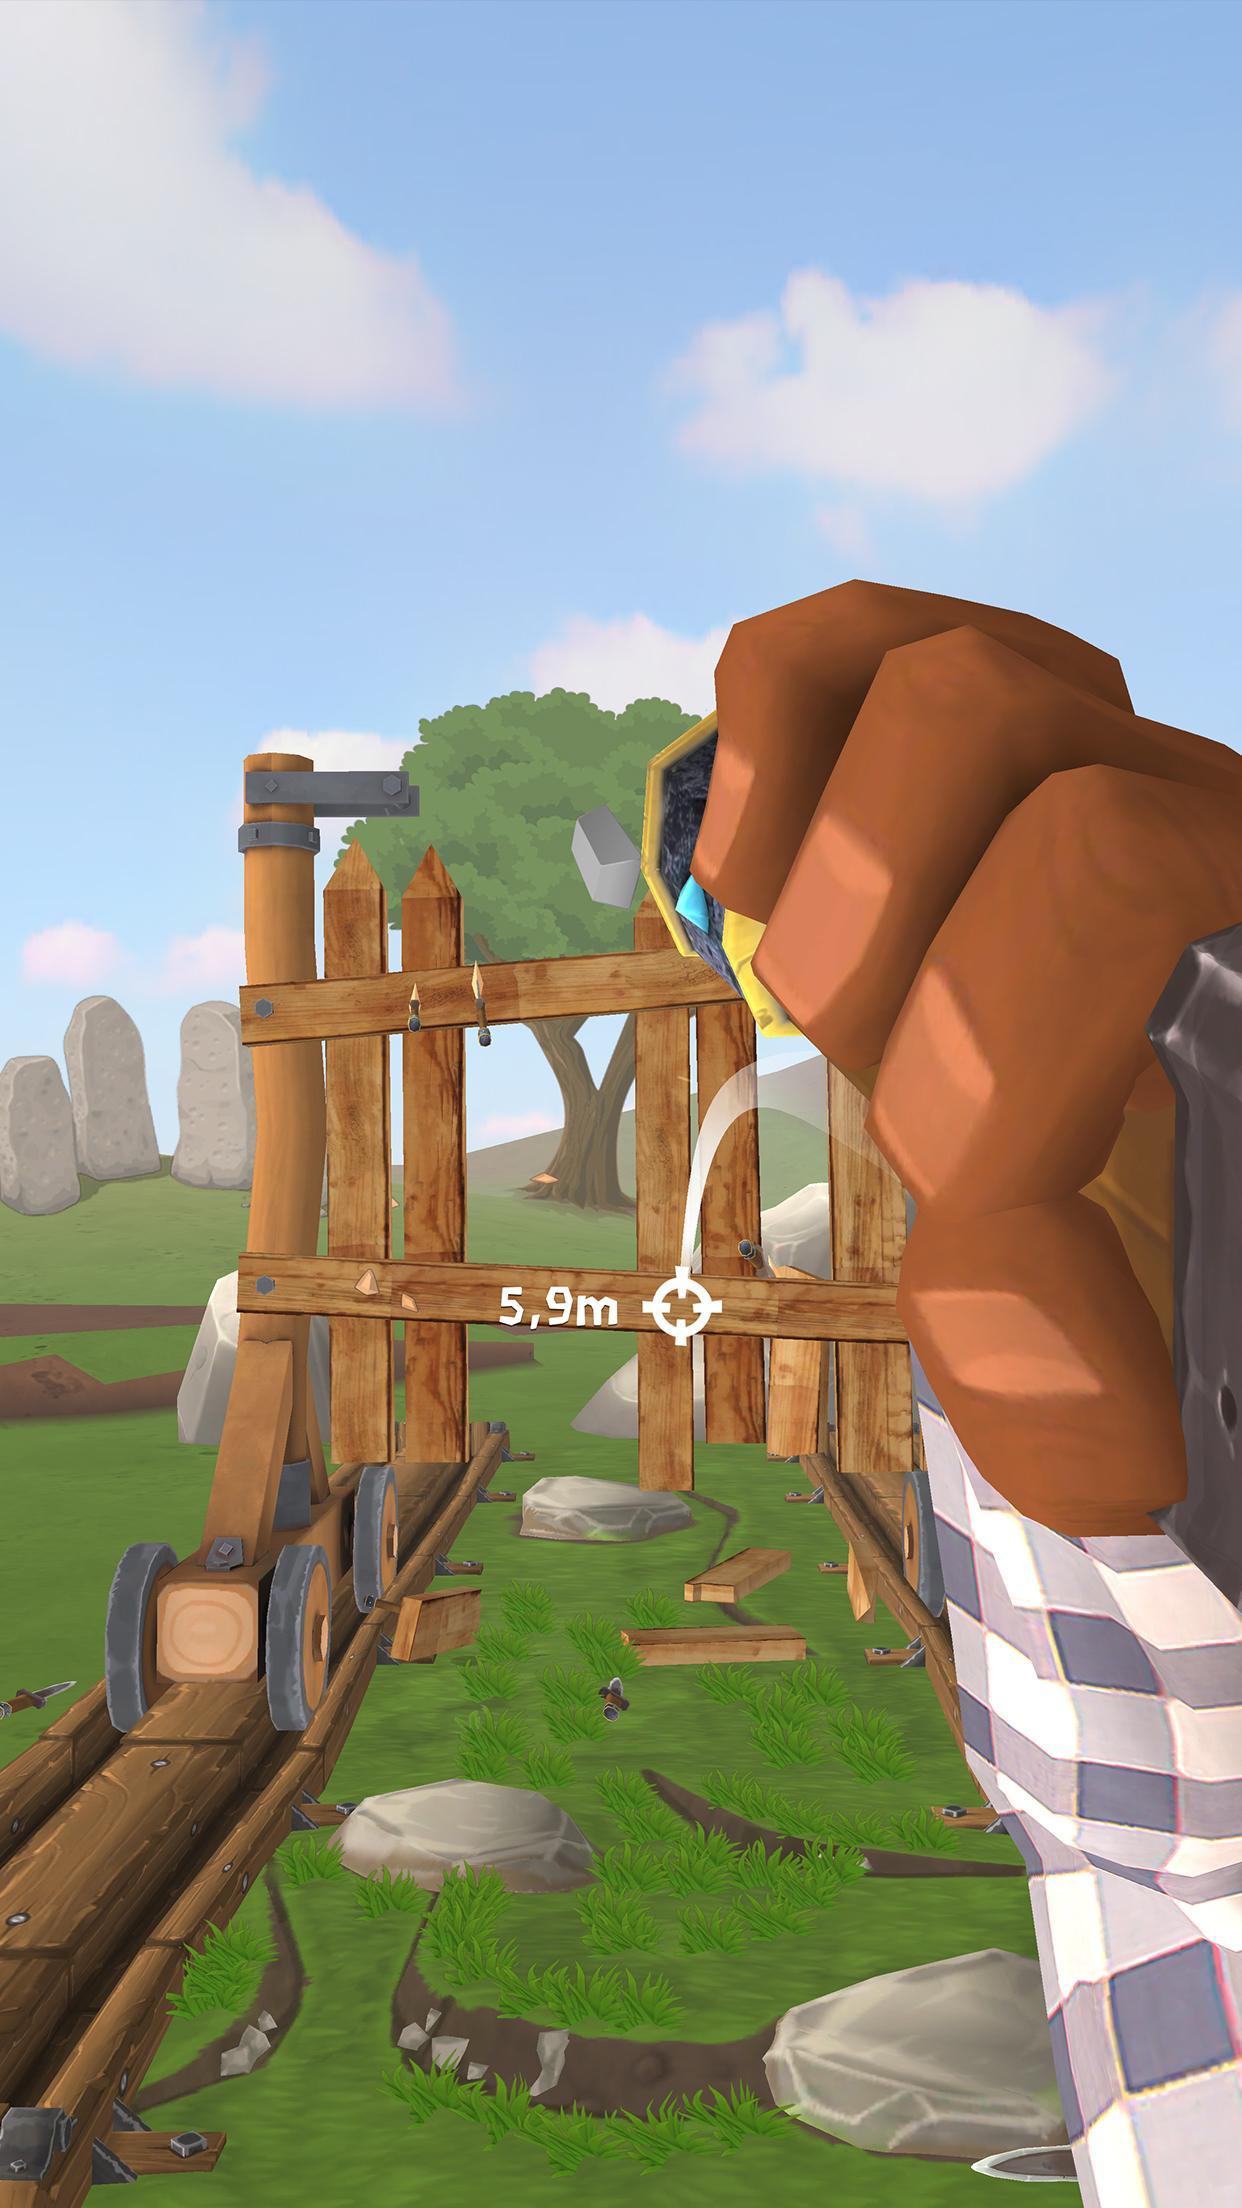 Knife Throwing Simulator For Android Apk Download - knife throwing simulator roblox